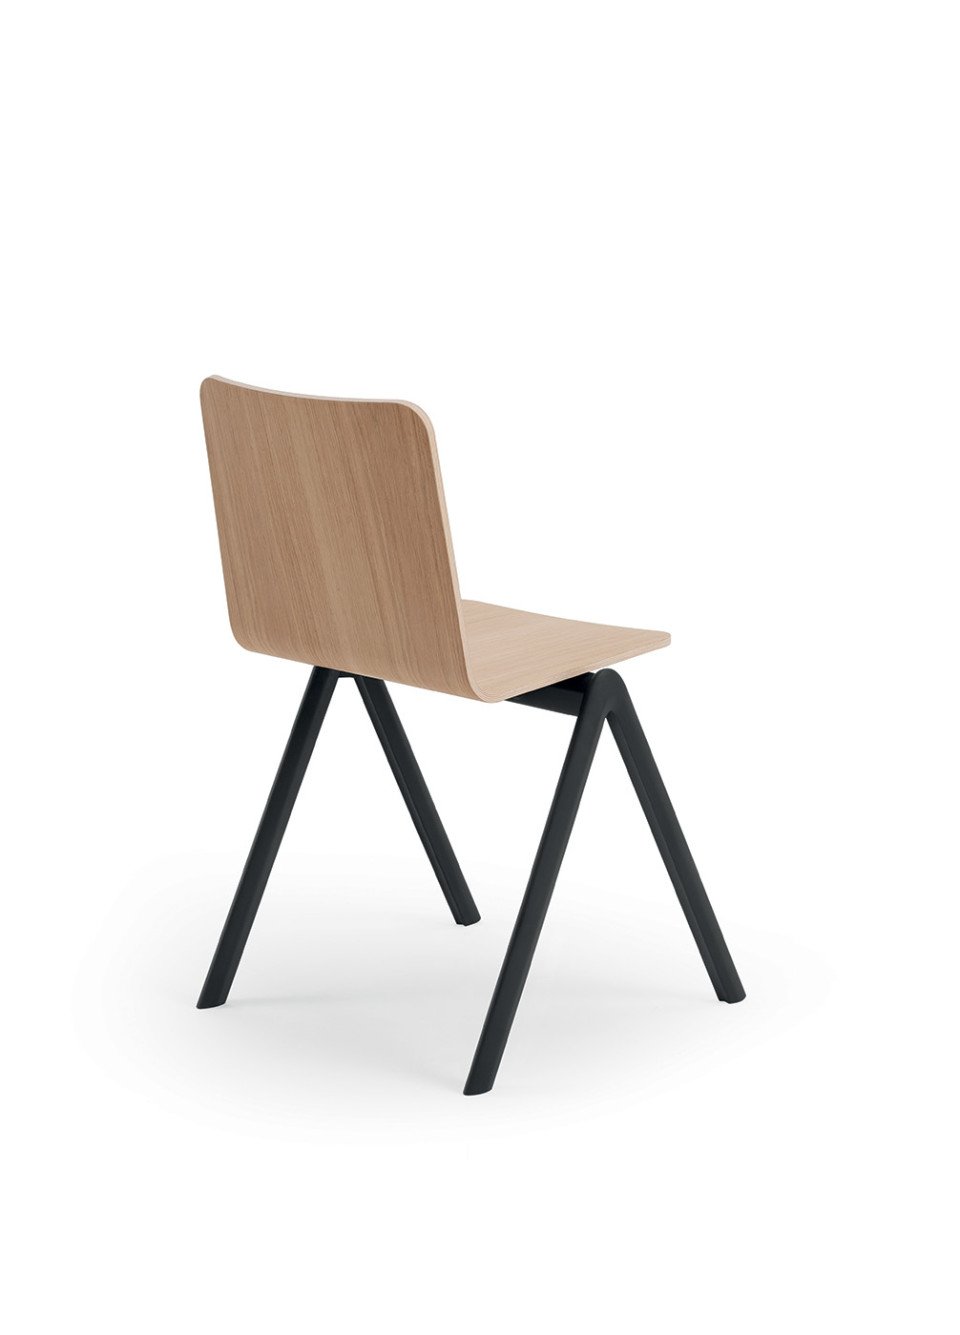 Stack Chair from Midj, designed by Martini & Dall'Agnol